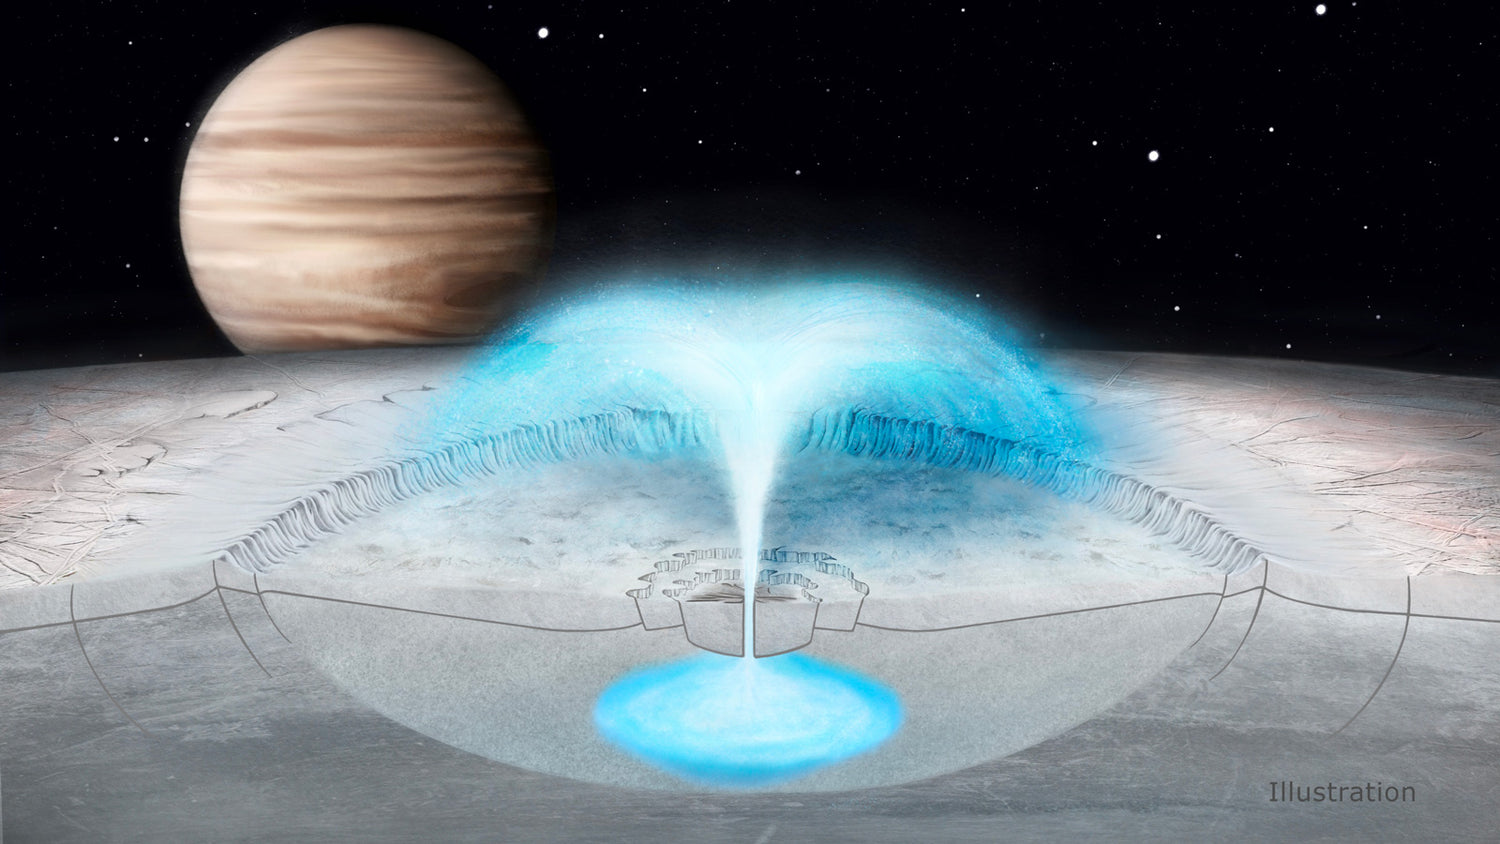 SpaceX Falcon Heavy Will Launch NASA Spacecraft Towards Jupiter's Europa Moon, Scientists Believe It May Have Water Plumes